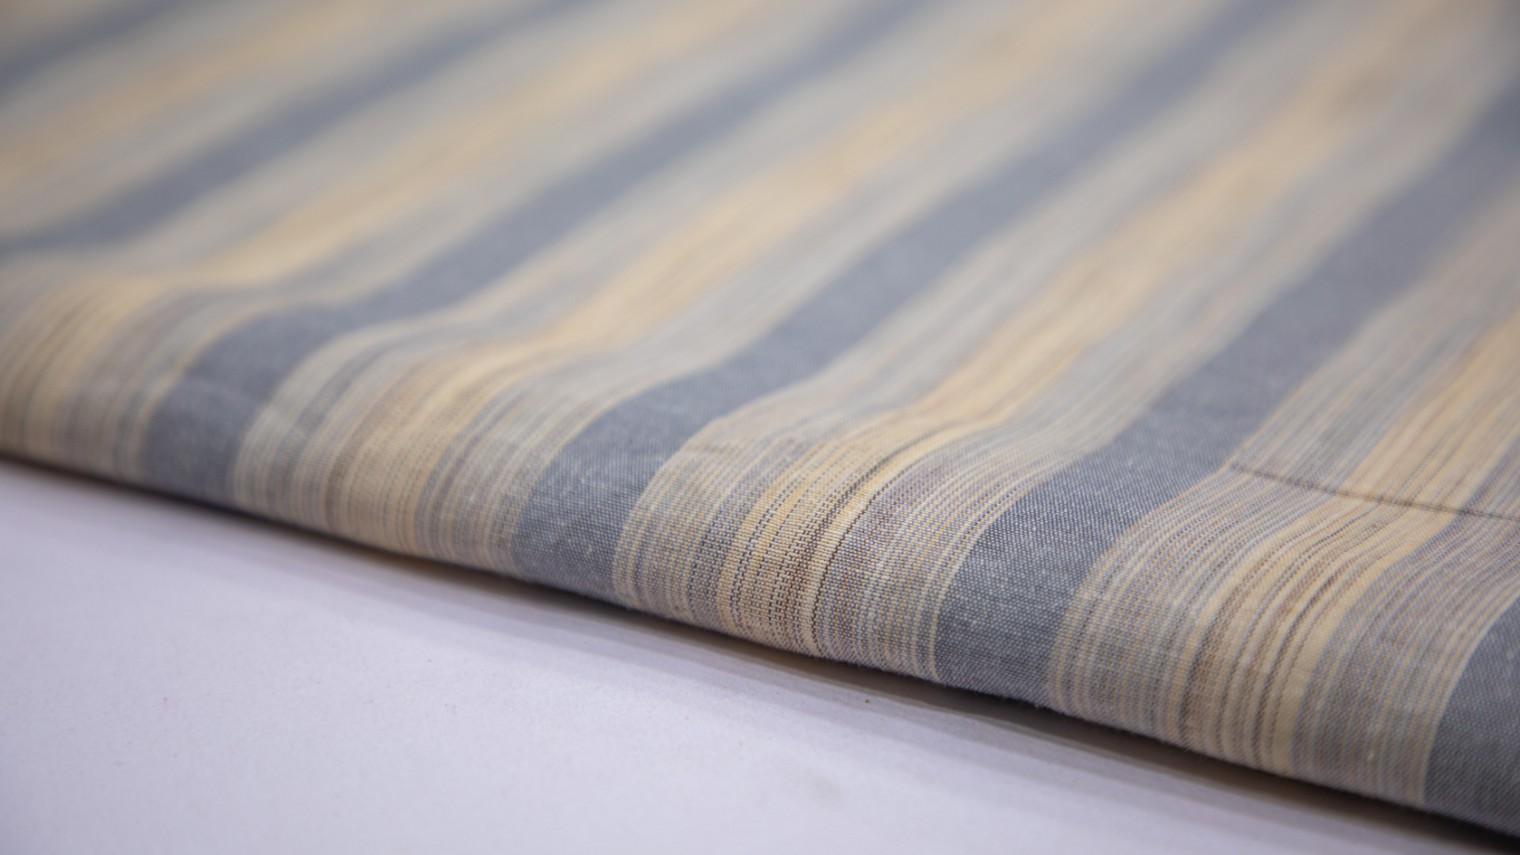 PASTEL BEIGE COLOR SOUTH COTTON HANDLOOM TWO TONE GREY STRIPES WEAVE FABRIC - 4294